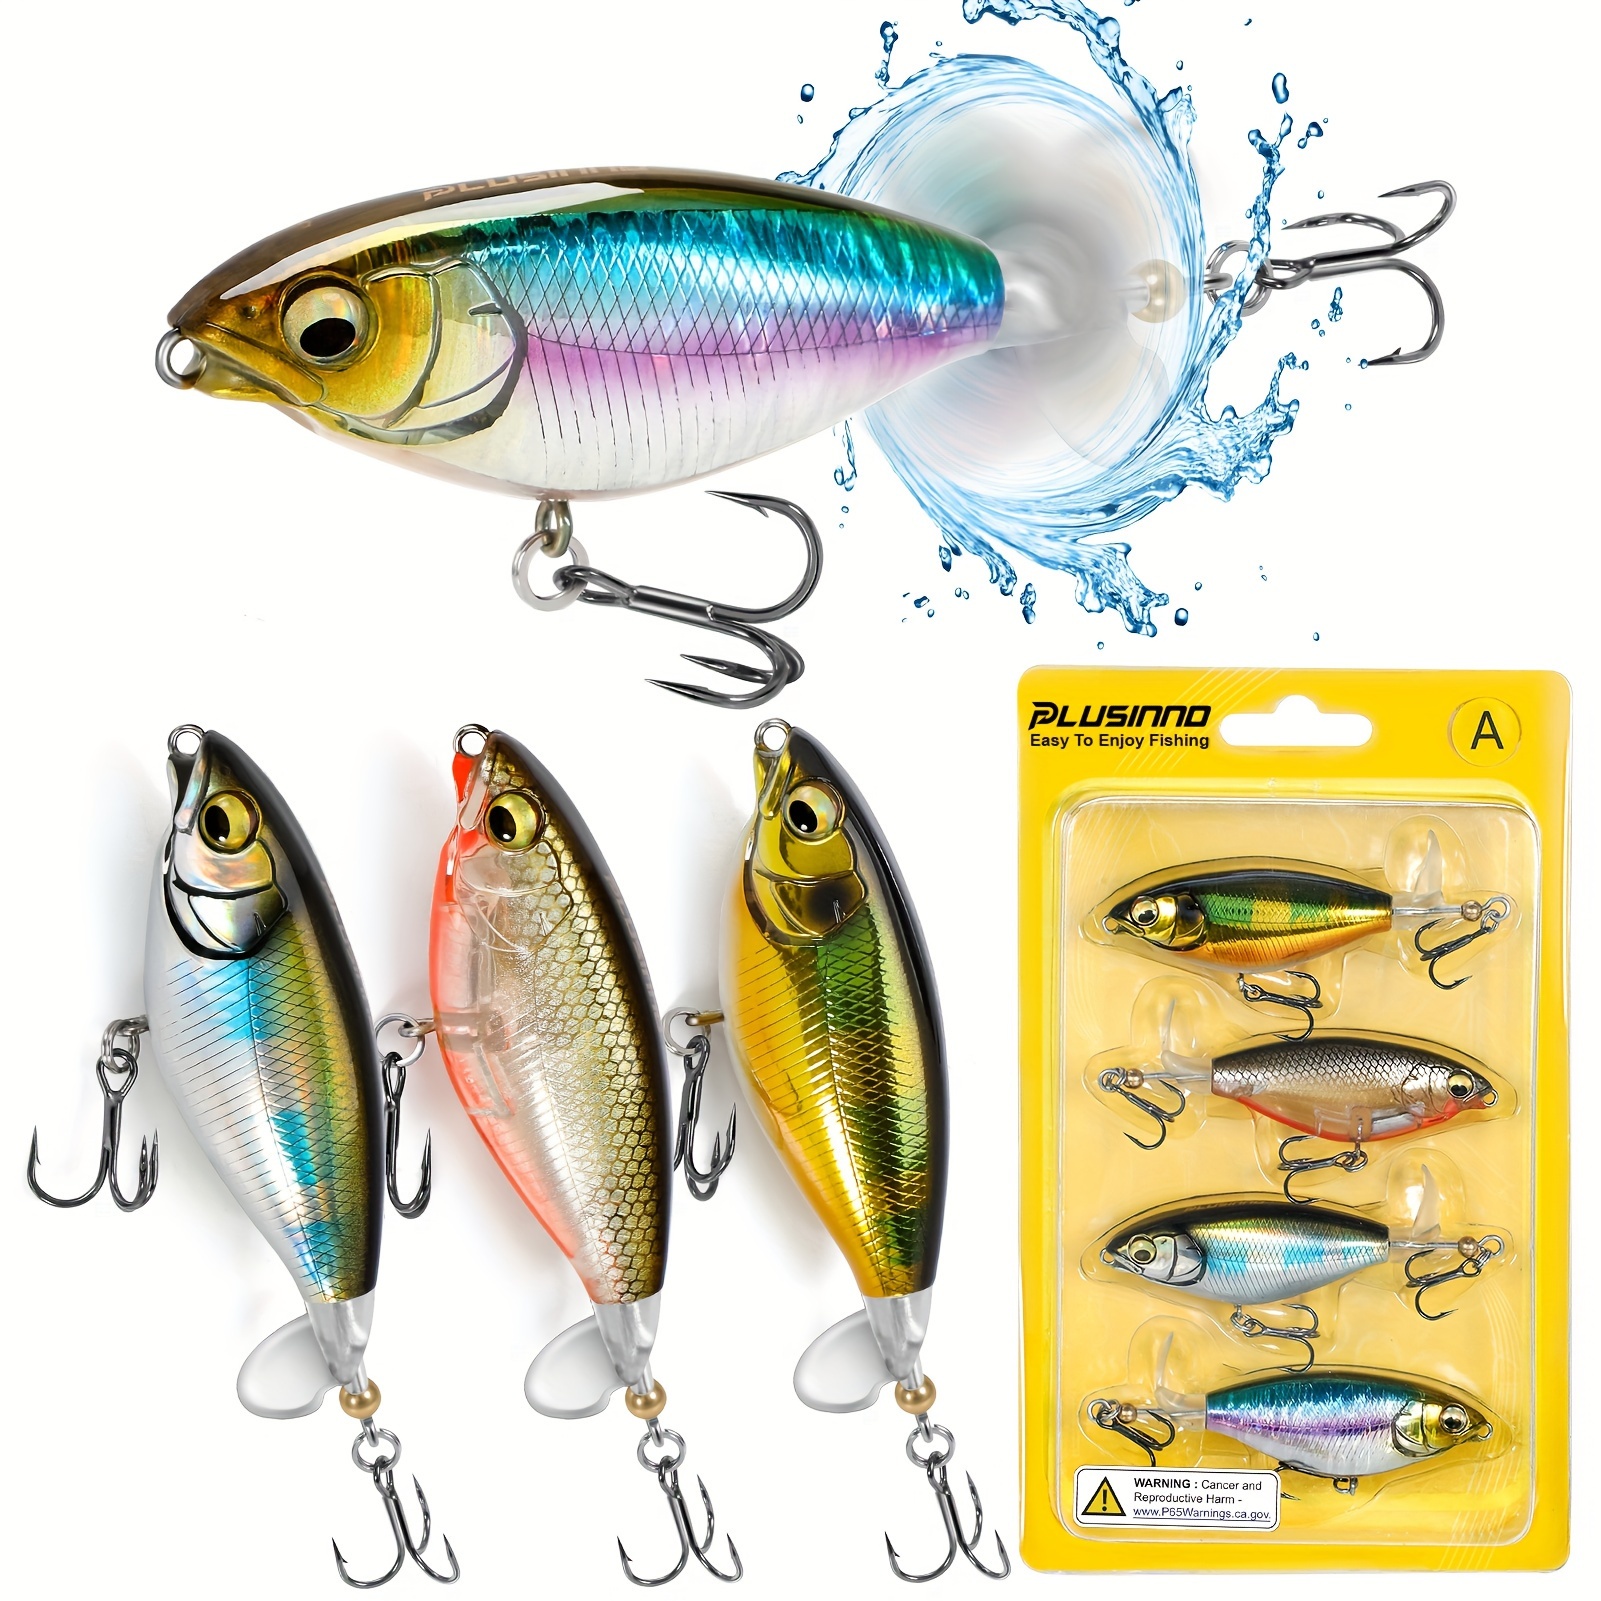 

Plusinno Top Water Fishing Lures, 4pcs Plopper Fishing Lures For Bass Trout Pike Perch